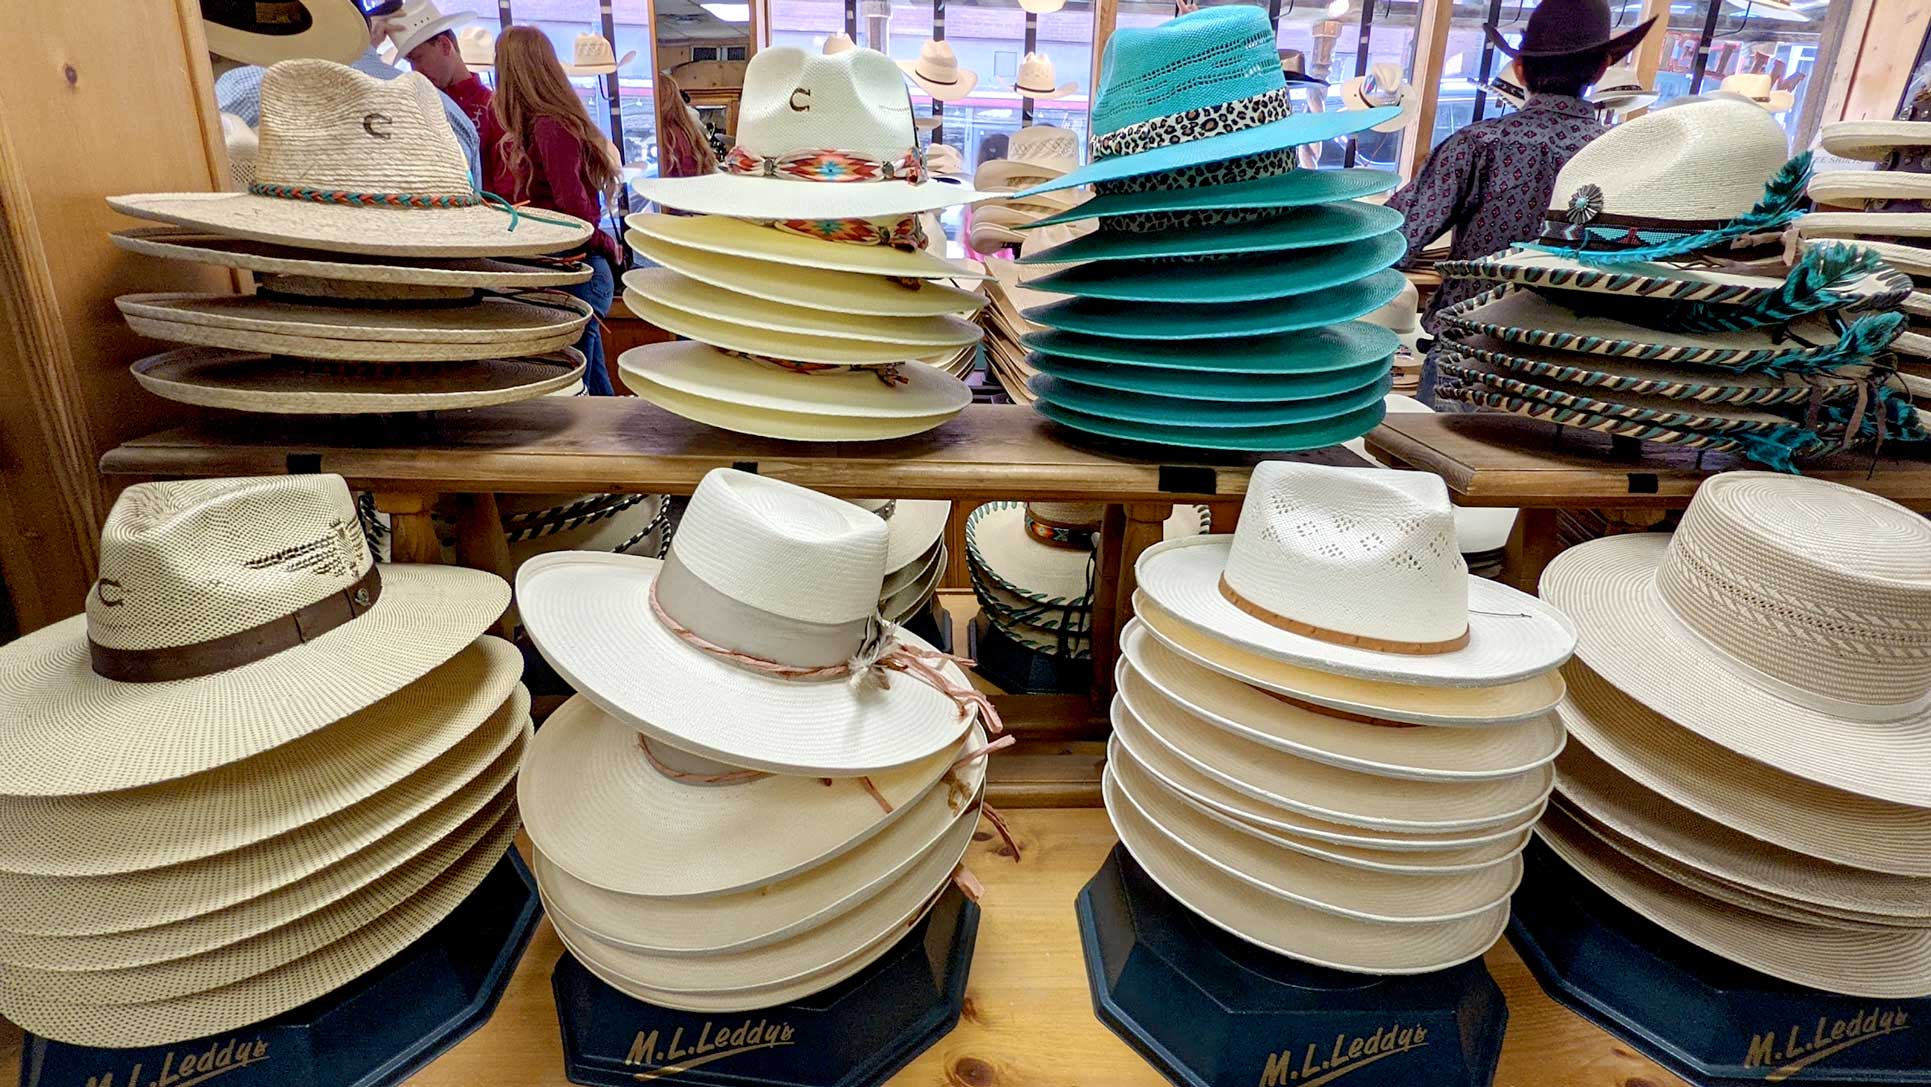 15 Texas Souvenirs You Won't Want To Leave The State Without